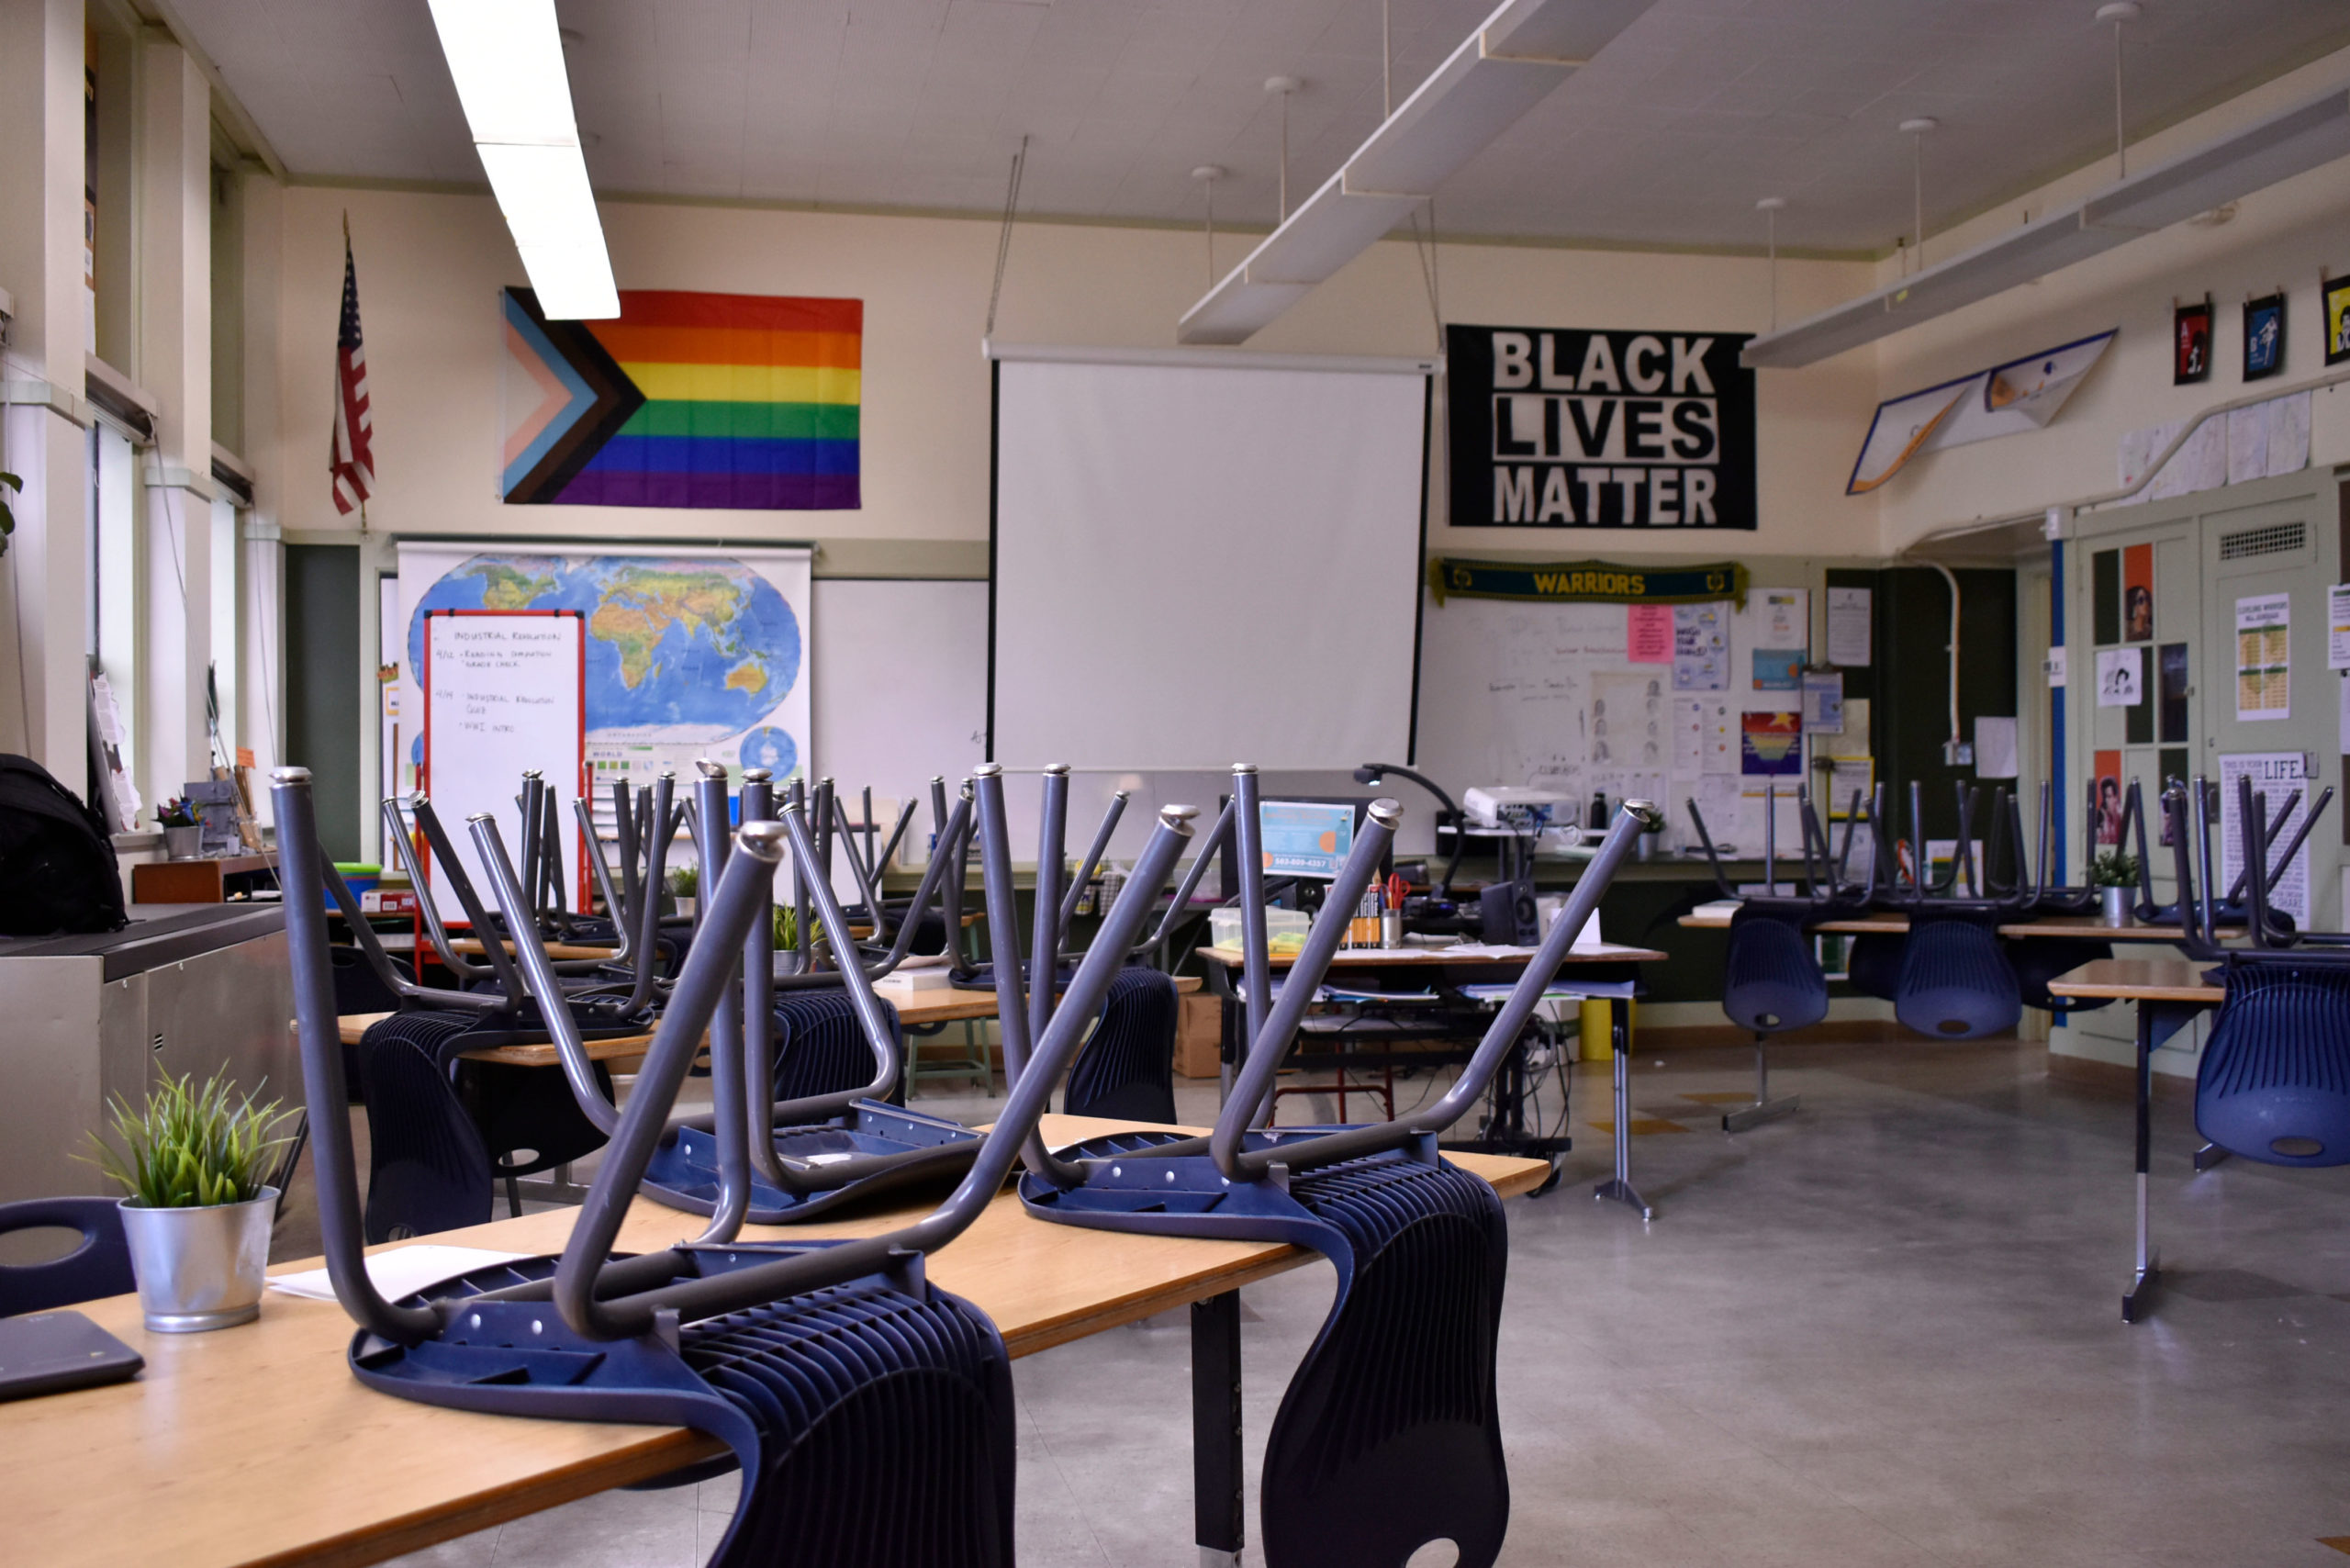 Julia Blattners classroom with lots of natural light and inclusive flags.